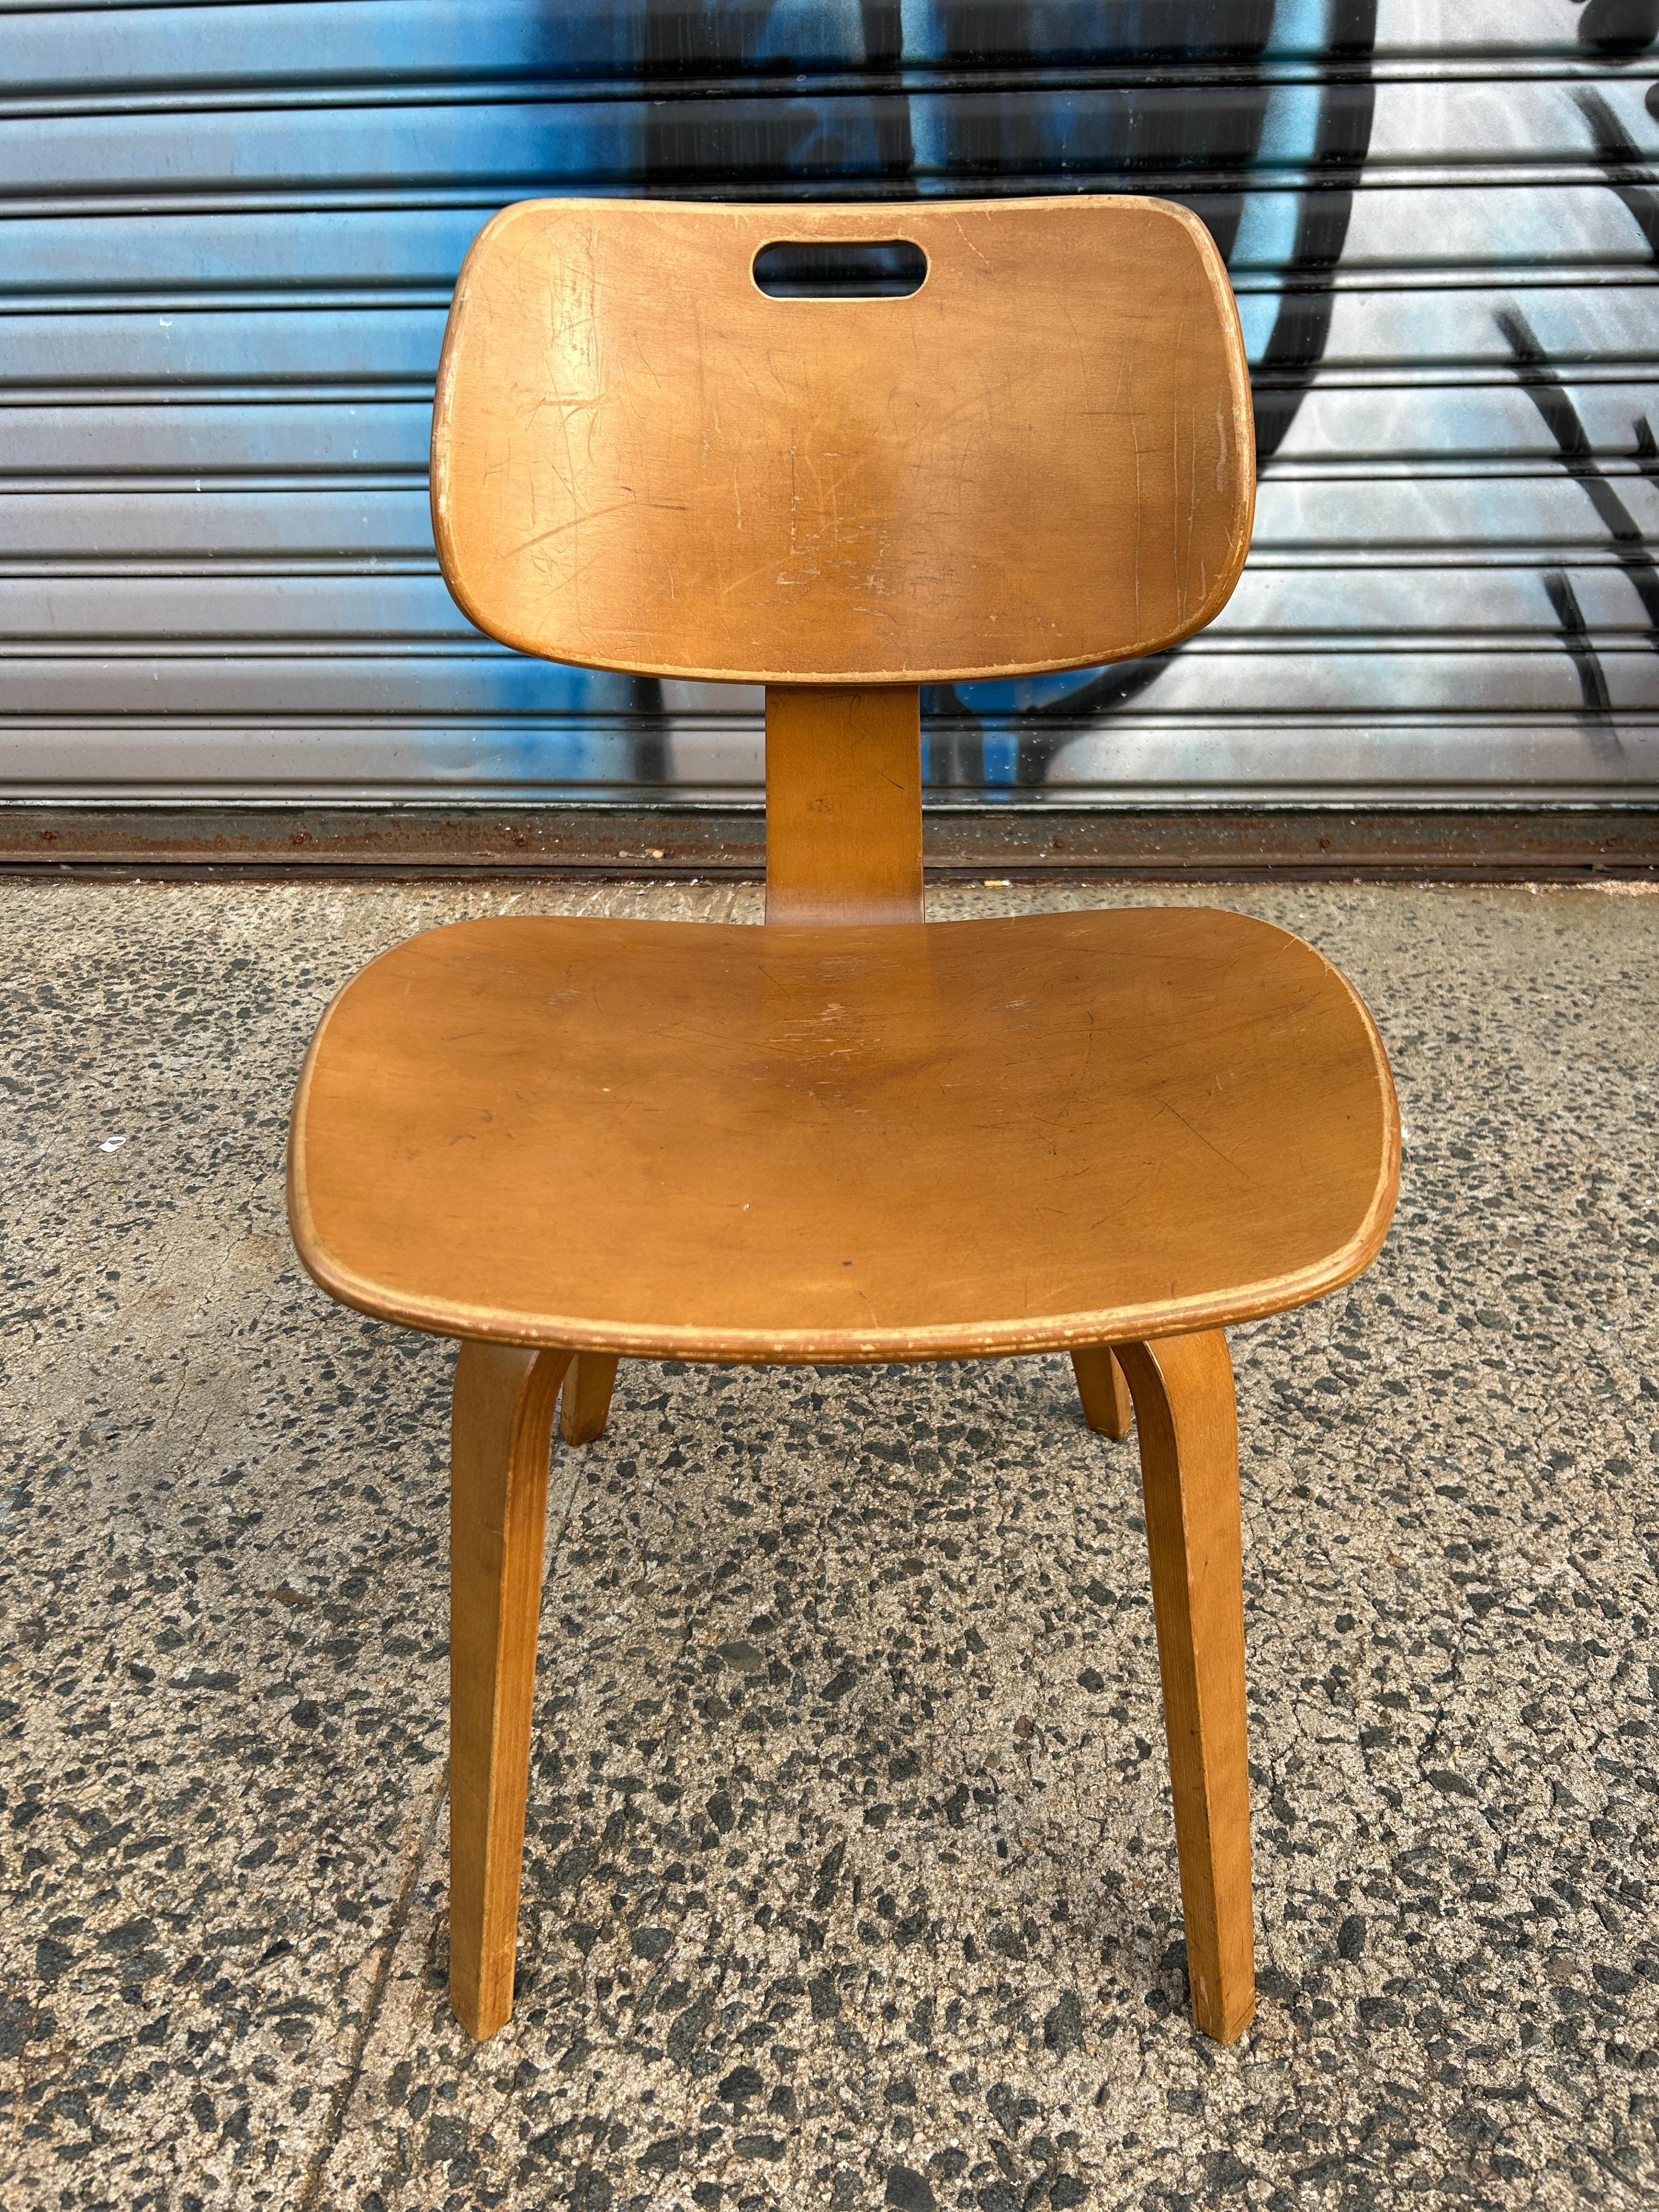 (1) Mid-Century Modern Thonet bentwood birch dining Chair with handle. Has original label. Good vintage condition chairs show signs of use but otherwise very solid and Original. Timeless chair design by Thonet. Curved birch bentwood legs. Located in